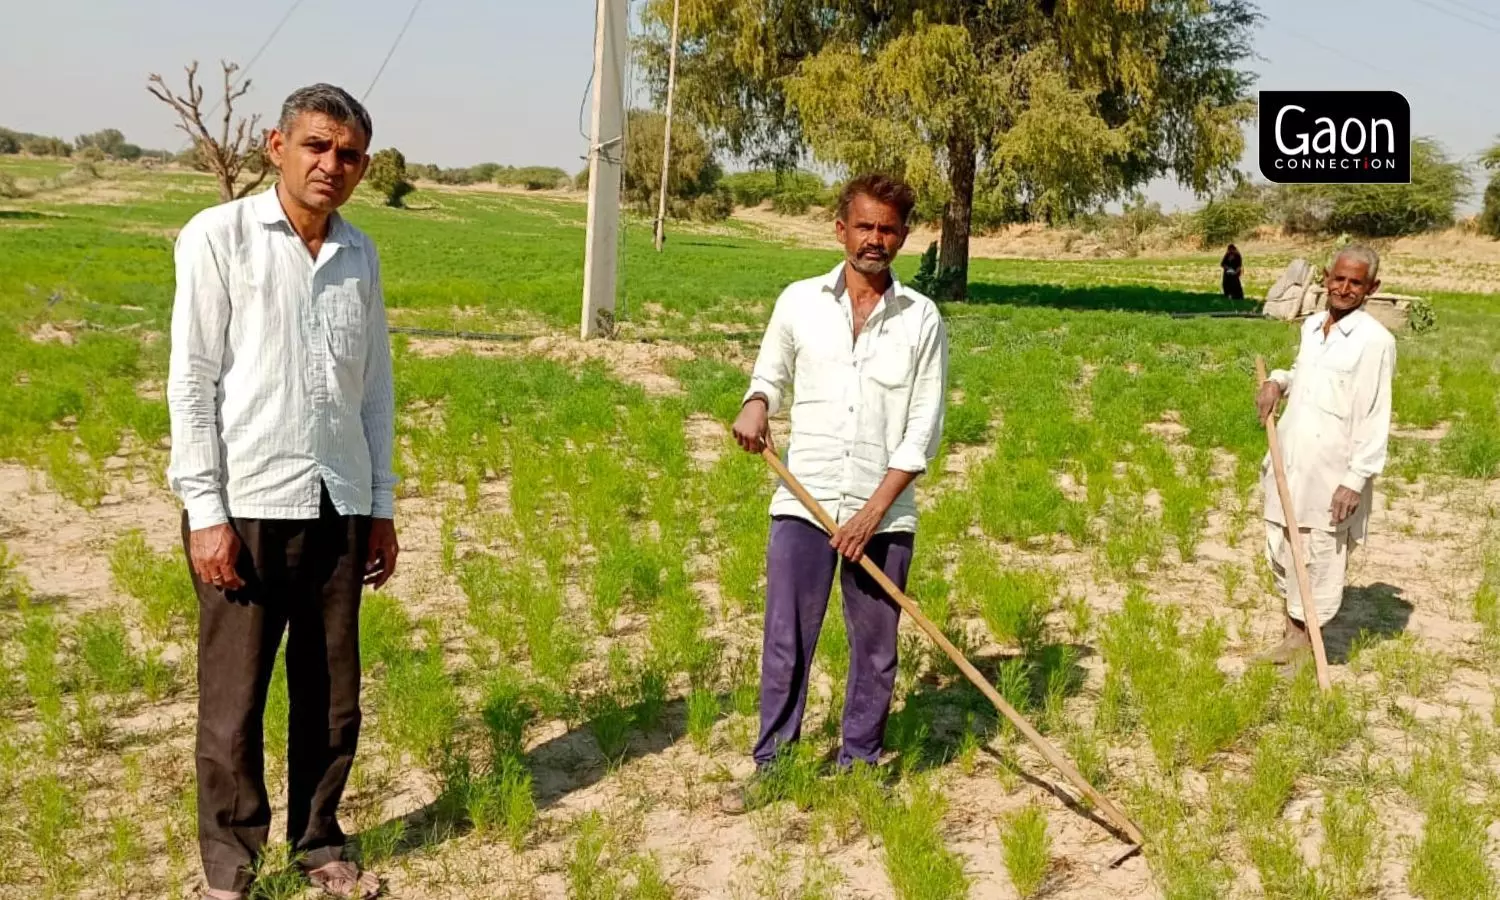 Lala Saran(extreme left) from GuraHema village in Chitalwana tehsil of Jalore district has reduced land under cumin cultivation from 60 bighas (1 bigha = 0.13 ha) last year to 40 bighas this year, and took a chance with mustard. Photo by arrangement.